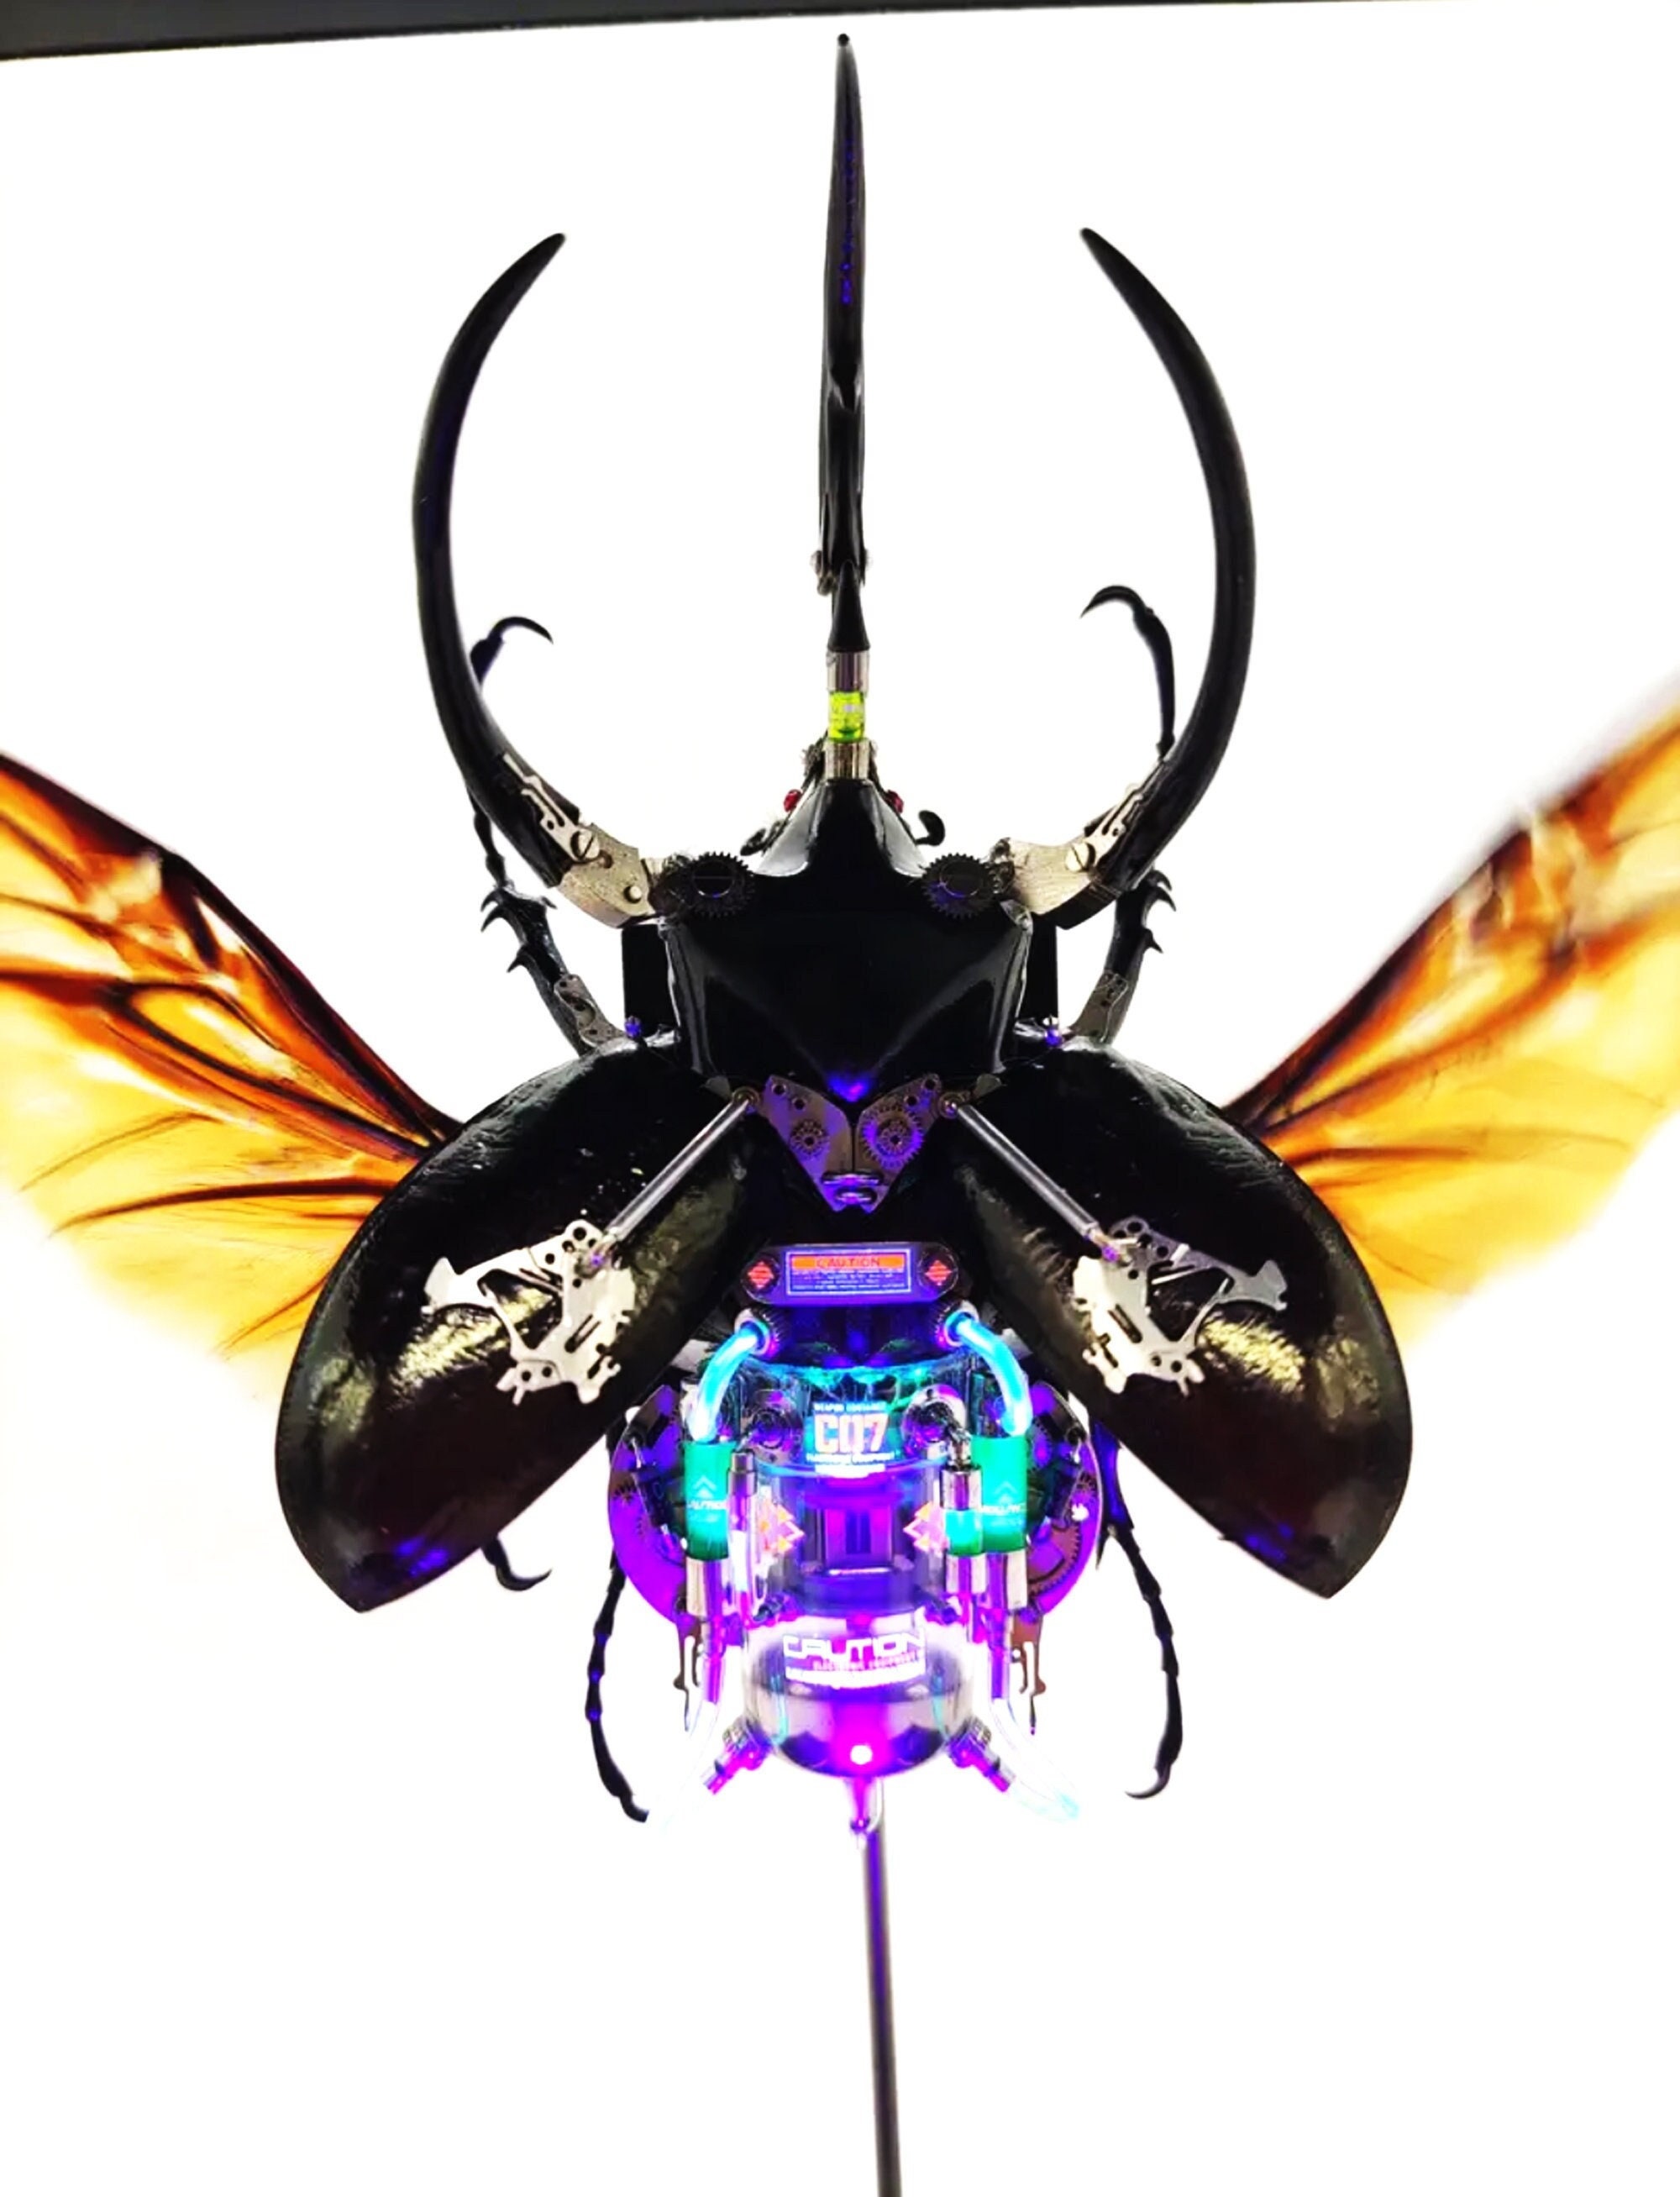 Steampunk Cyborg Mechanical Beetle Insects Bugs Kinetic image picture